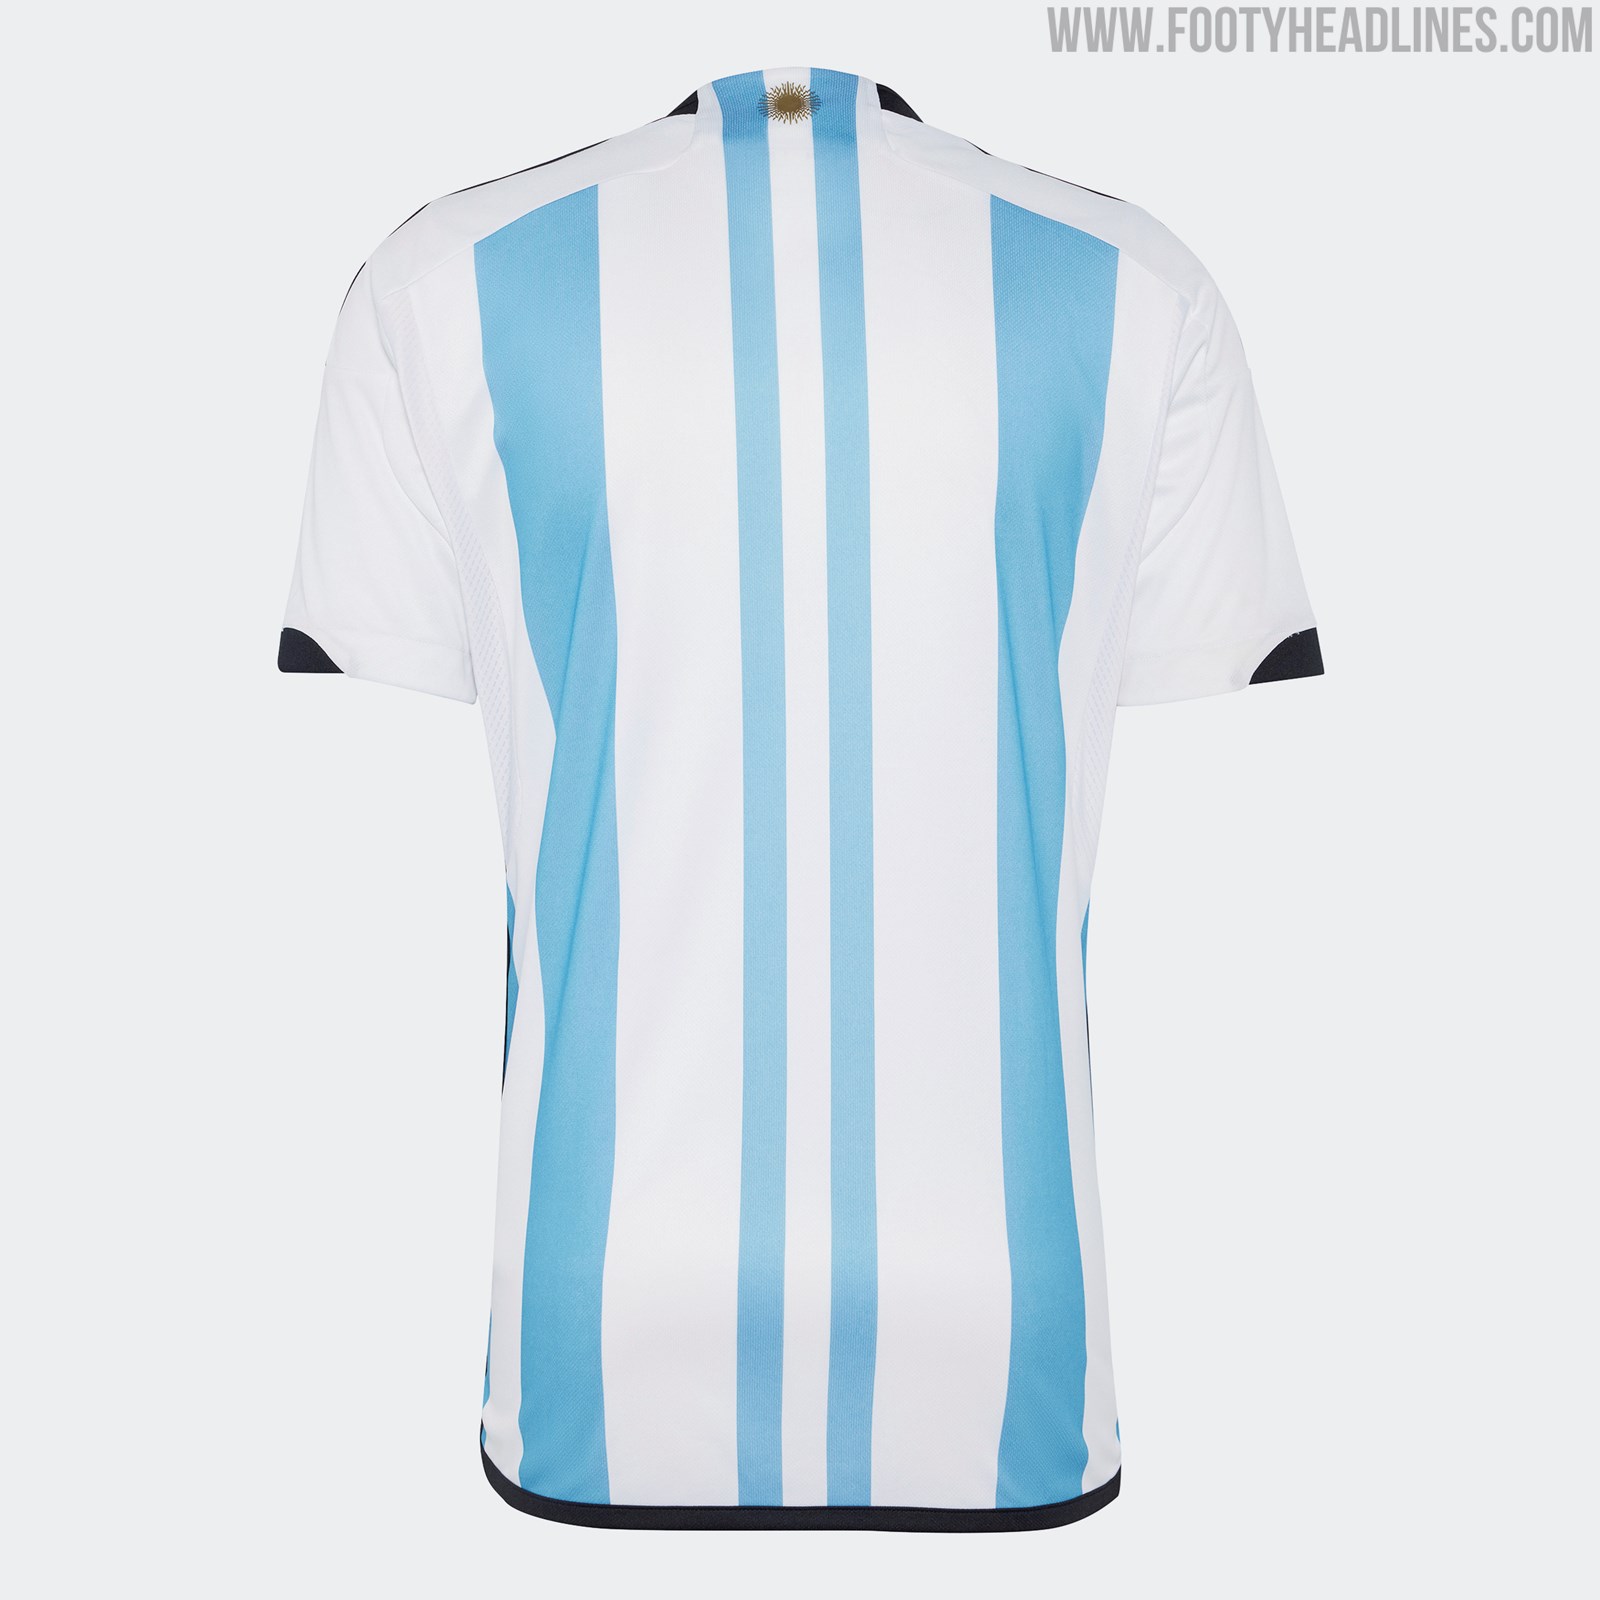 Adidas Argentina 3-Star Kit Released - Again Sold Out Within Minutes in  Argentina - Footy Headlines